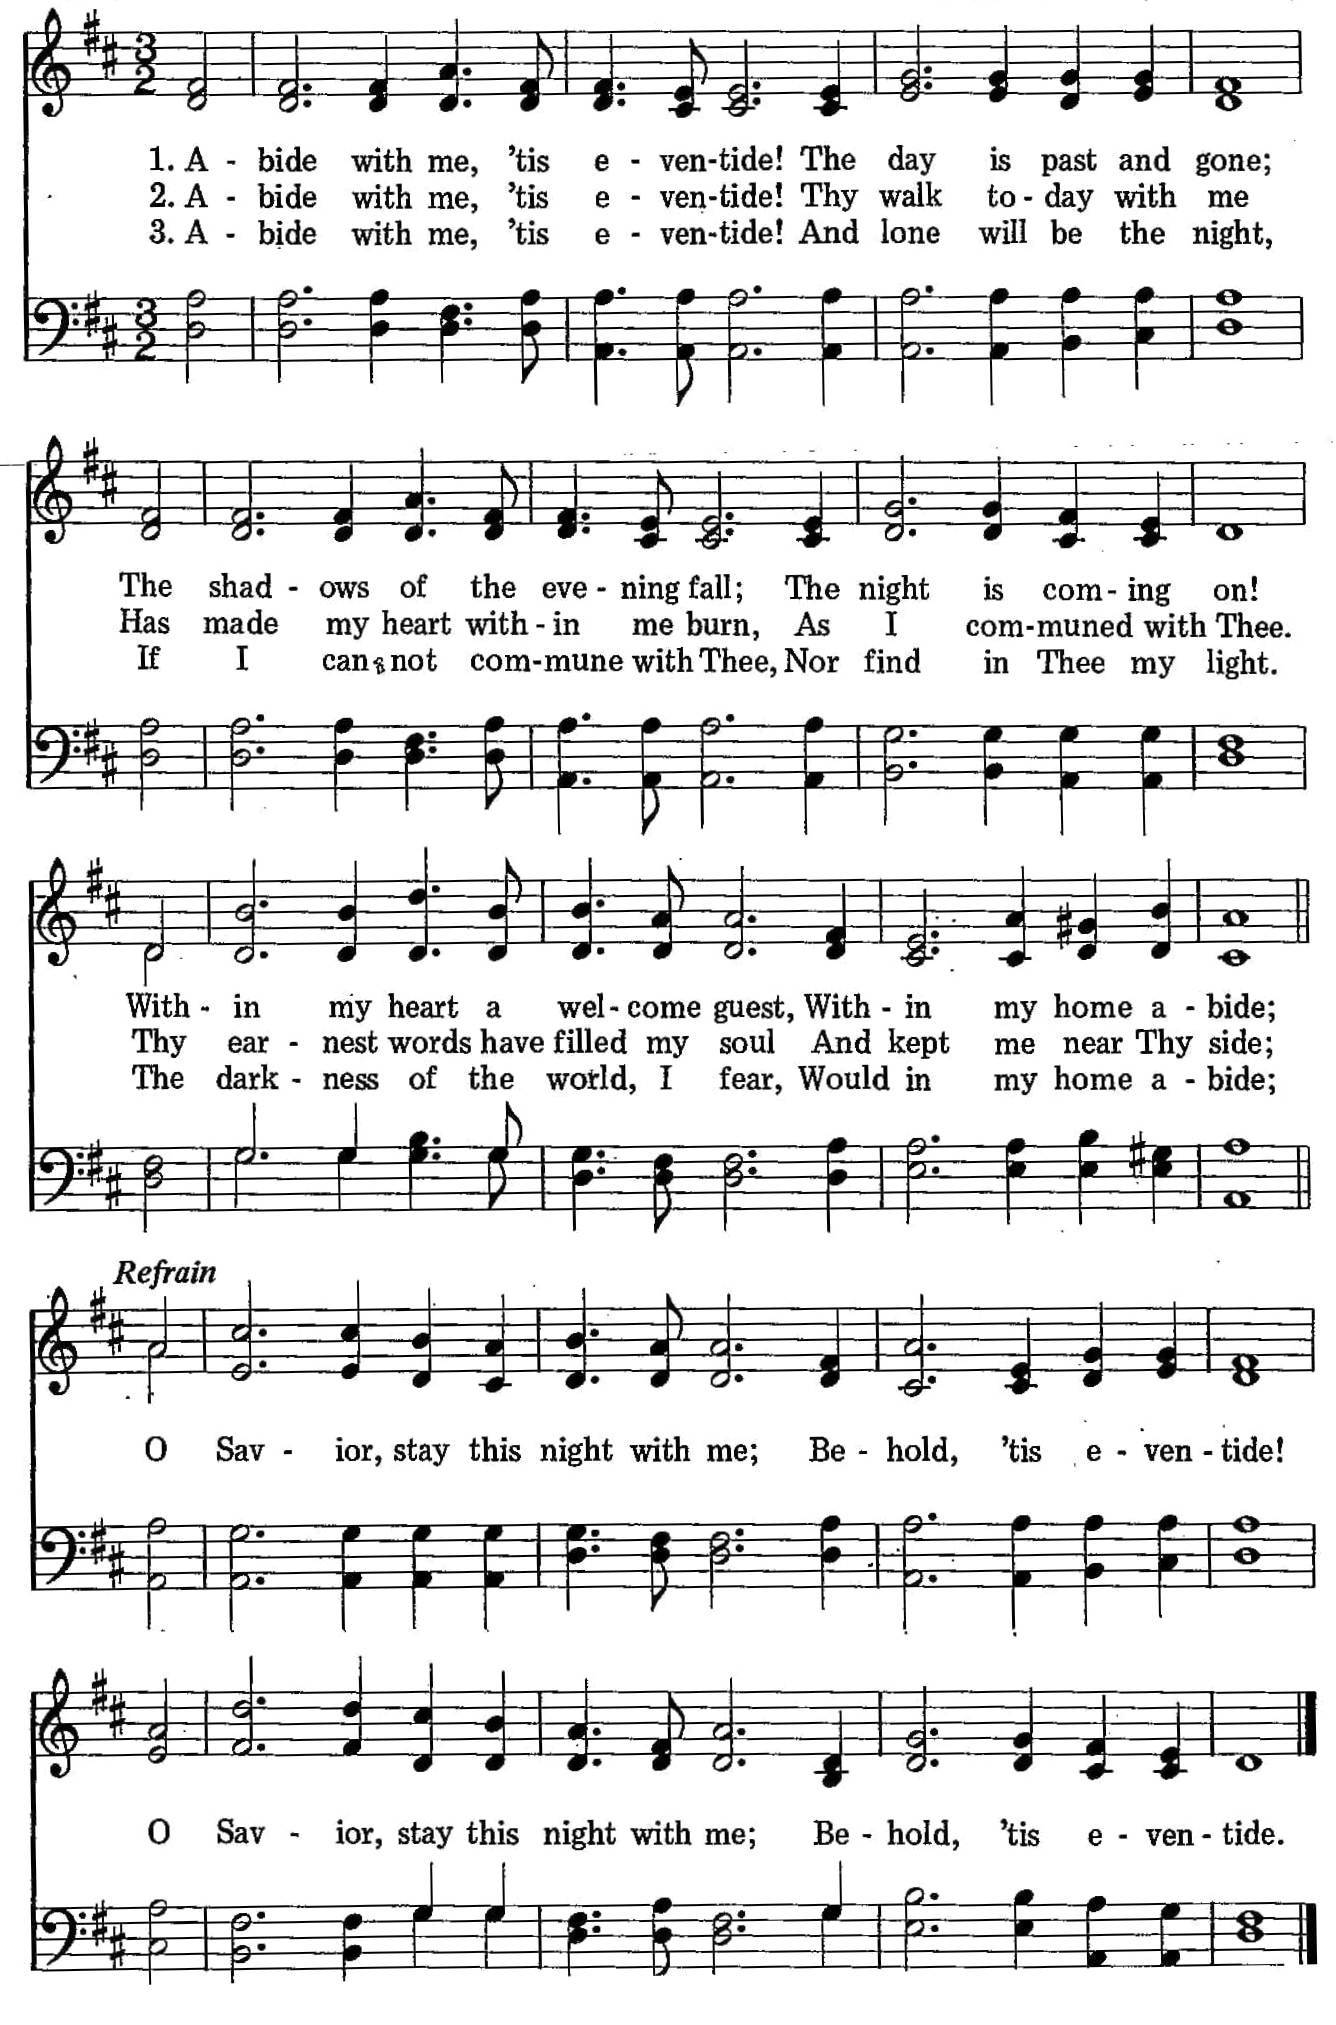 046 – Abide With Me, 'Tis Eventide sheet music